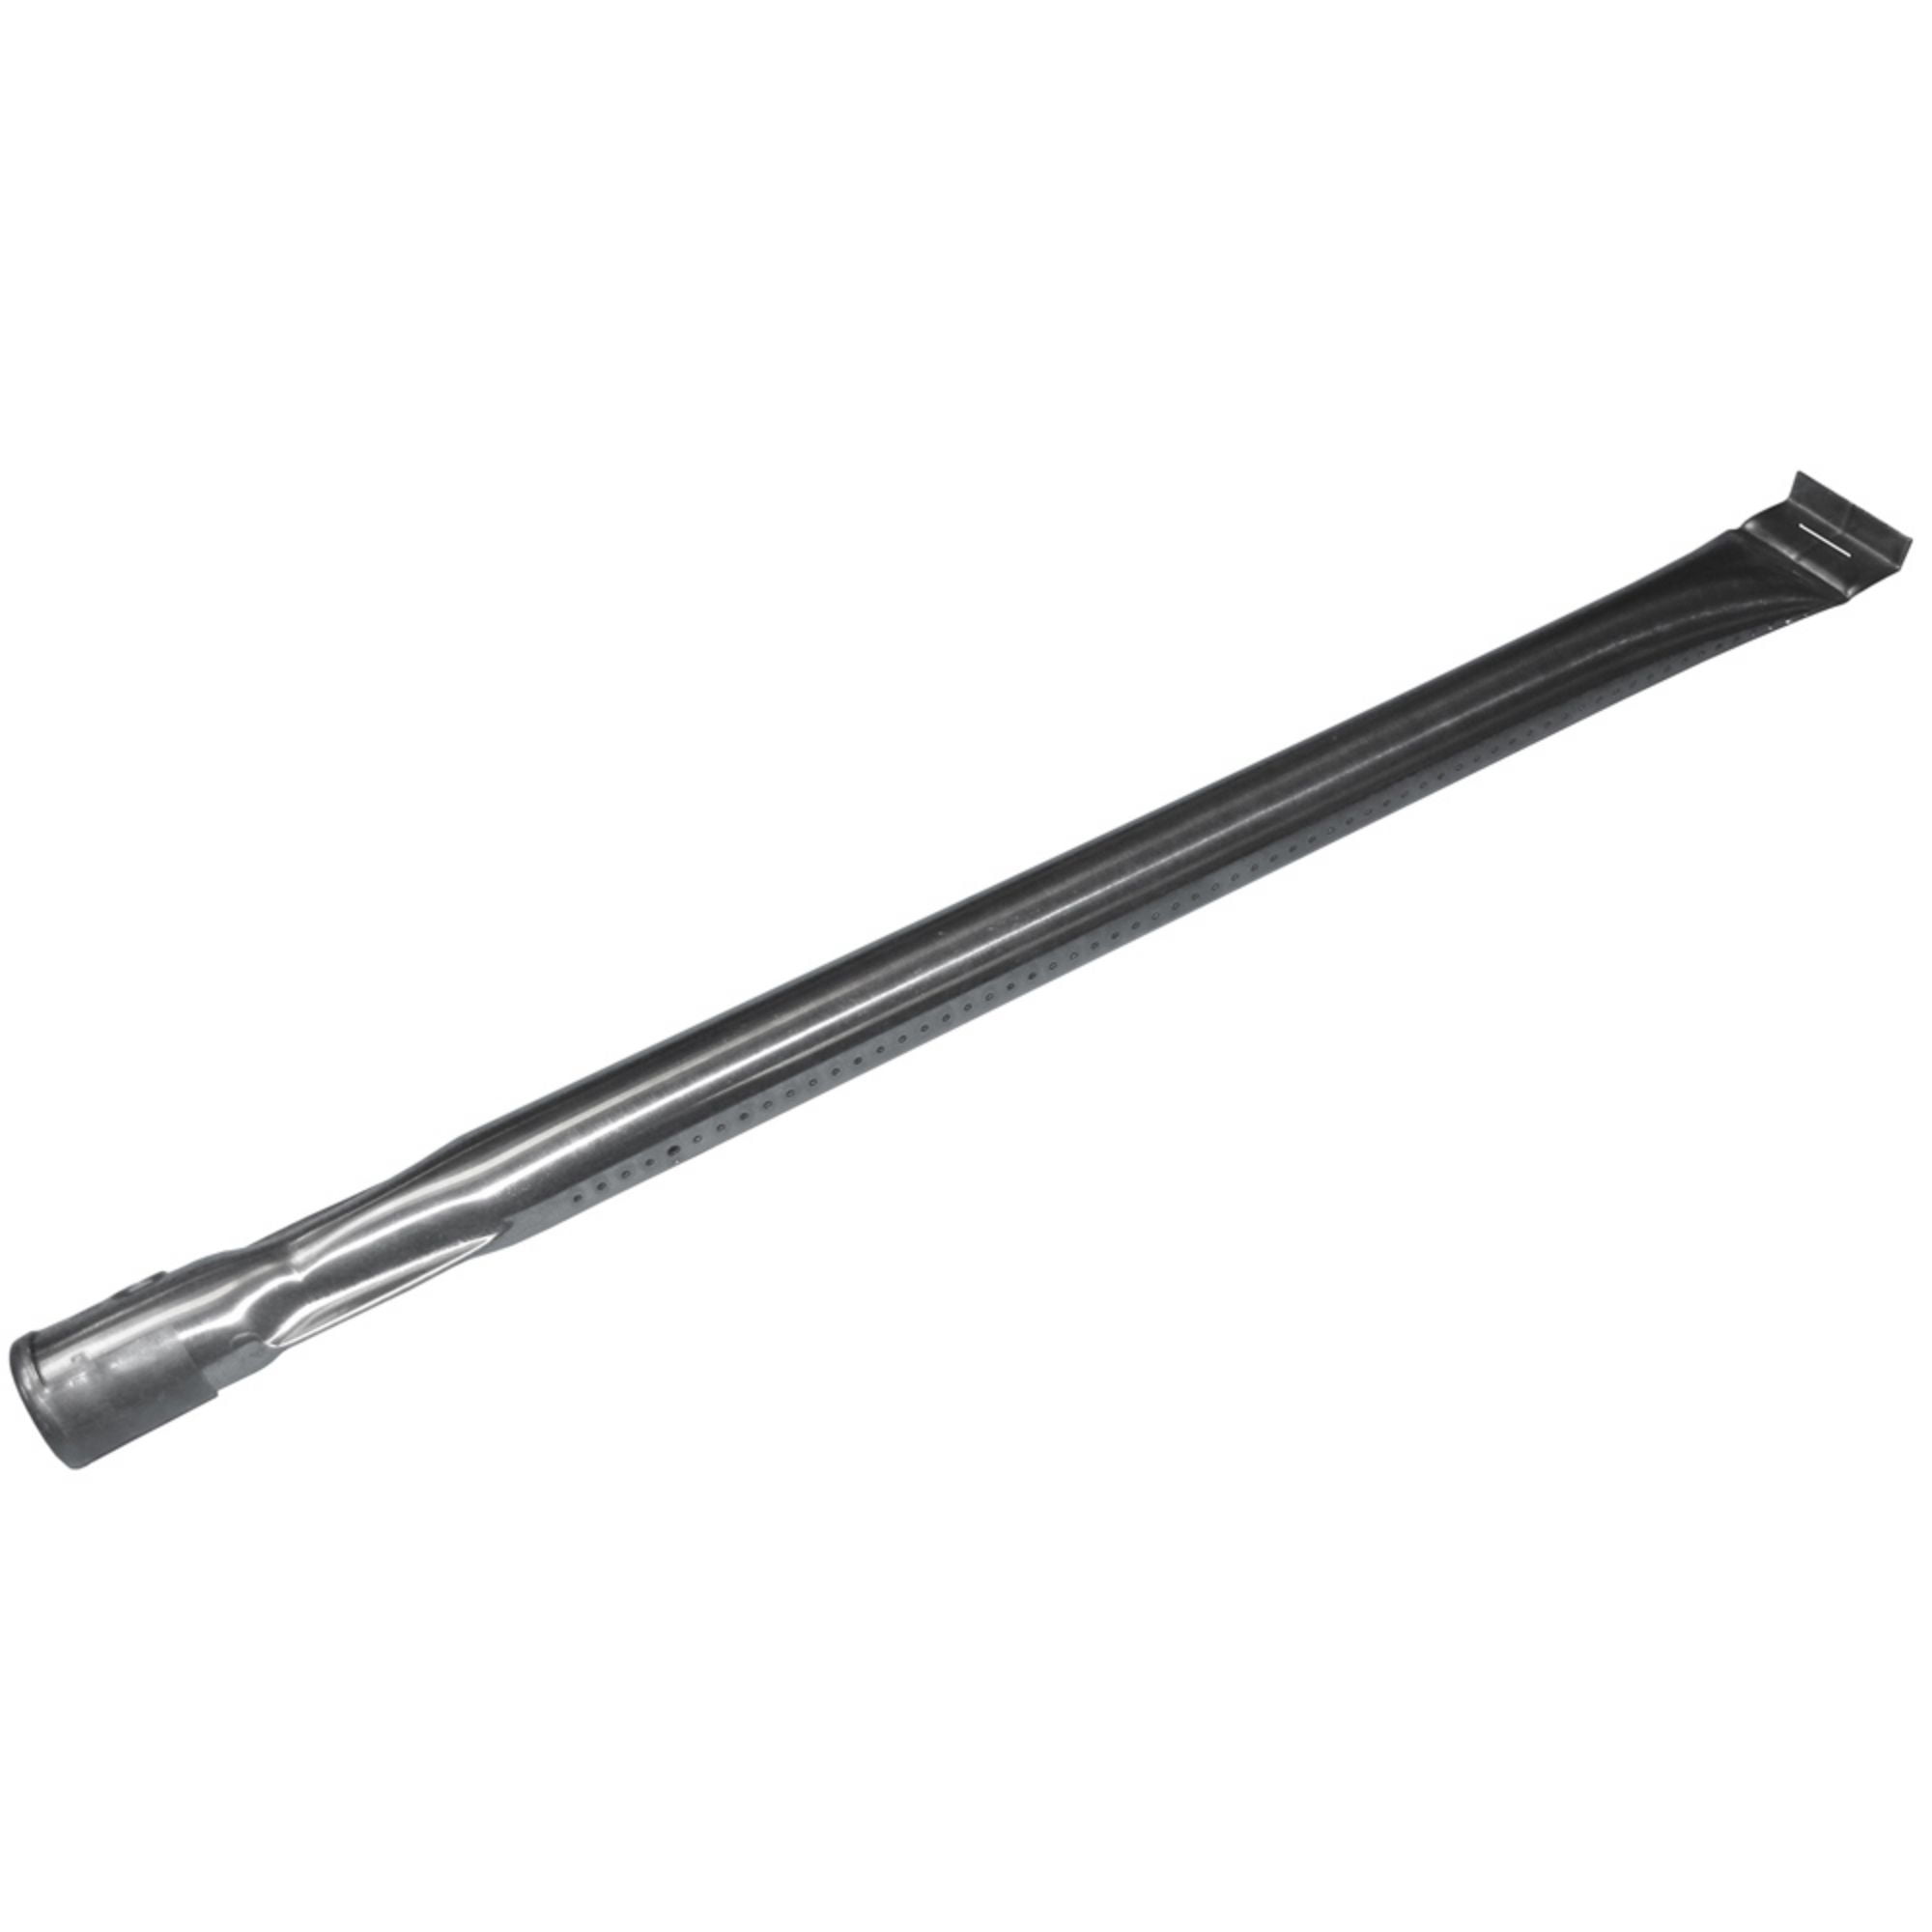 Stainless steel burner for Tera Gear brand gas grills